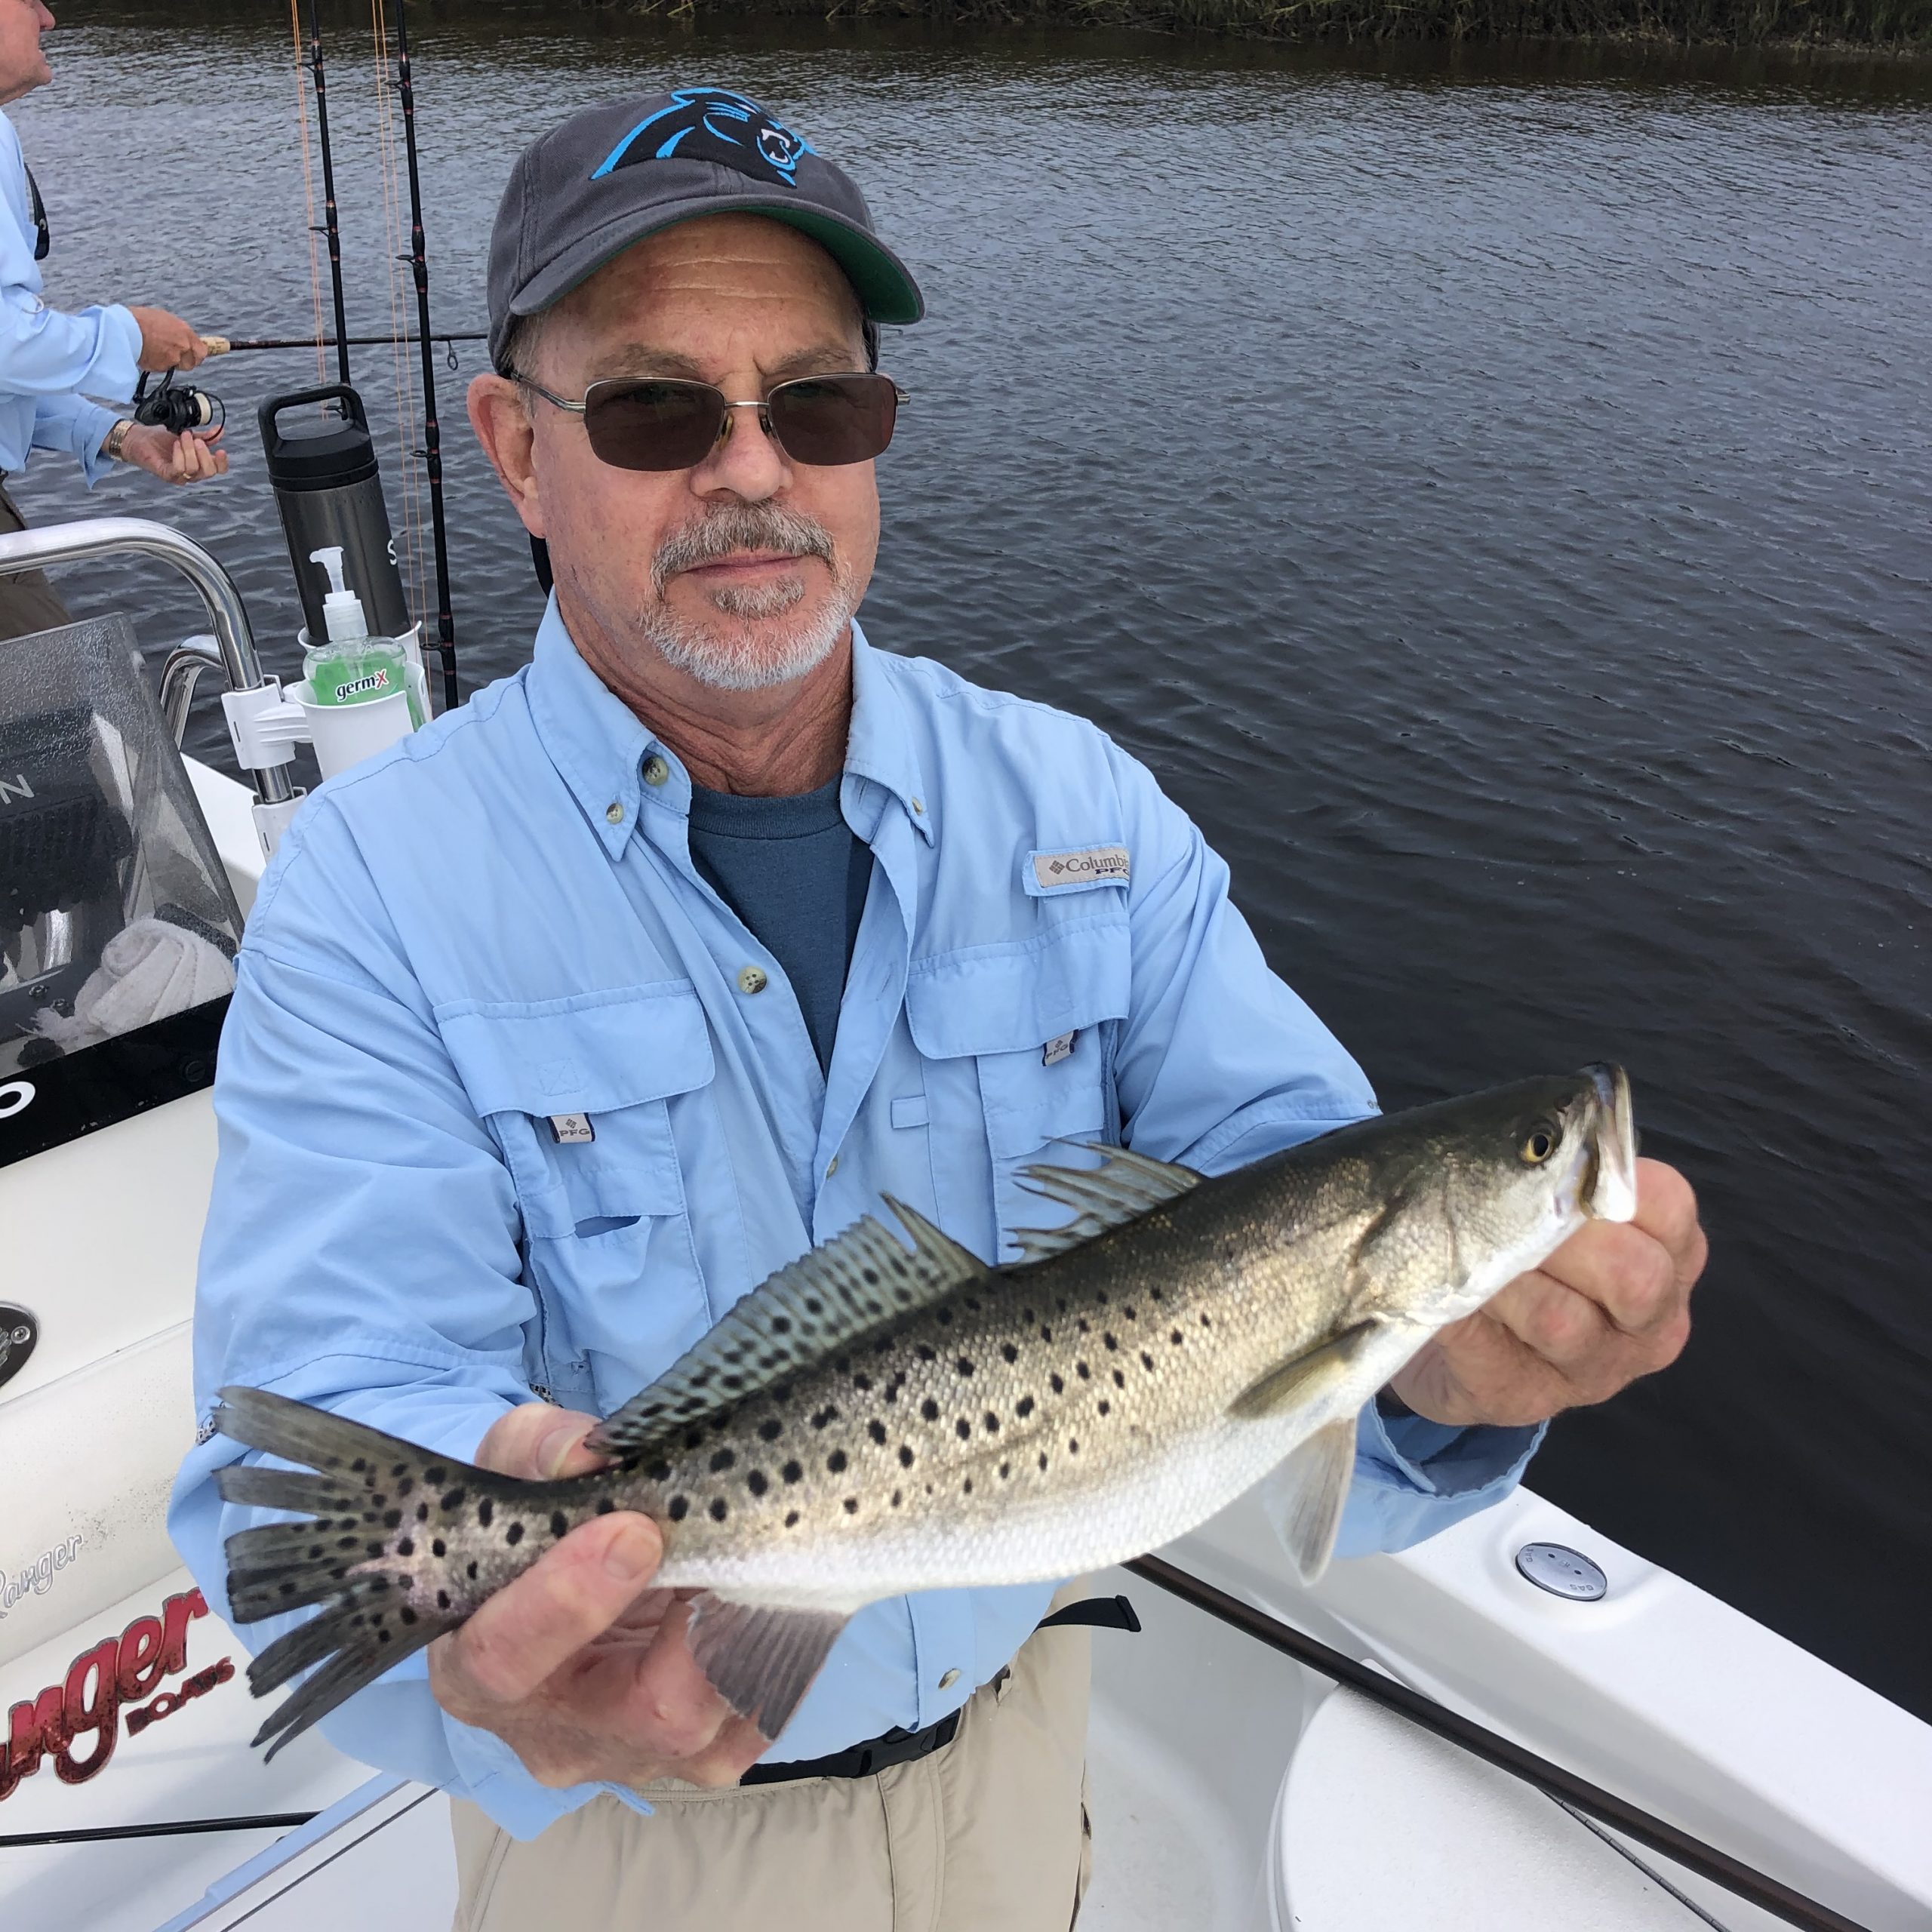 Speckled trout fishing Setup - 8 must haves for Speckled Sea Trout 